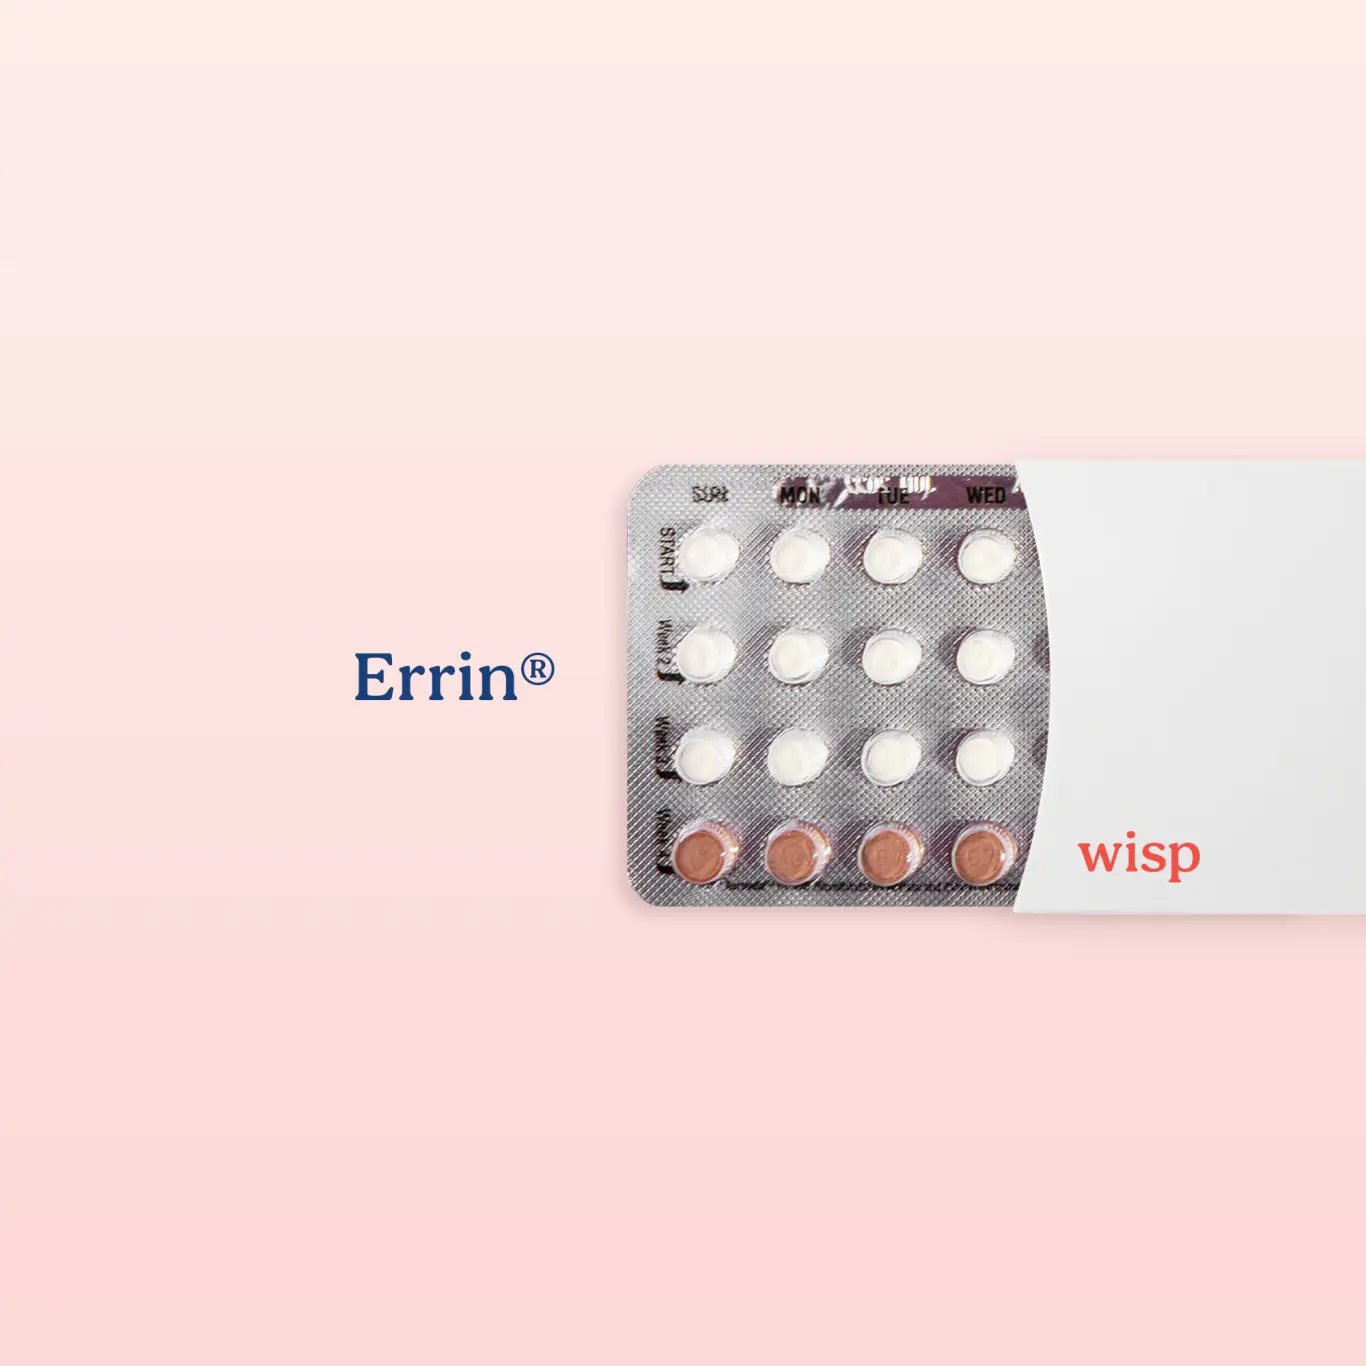 Packet of Erinn birth control pills on a pink background